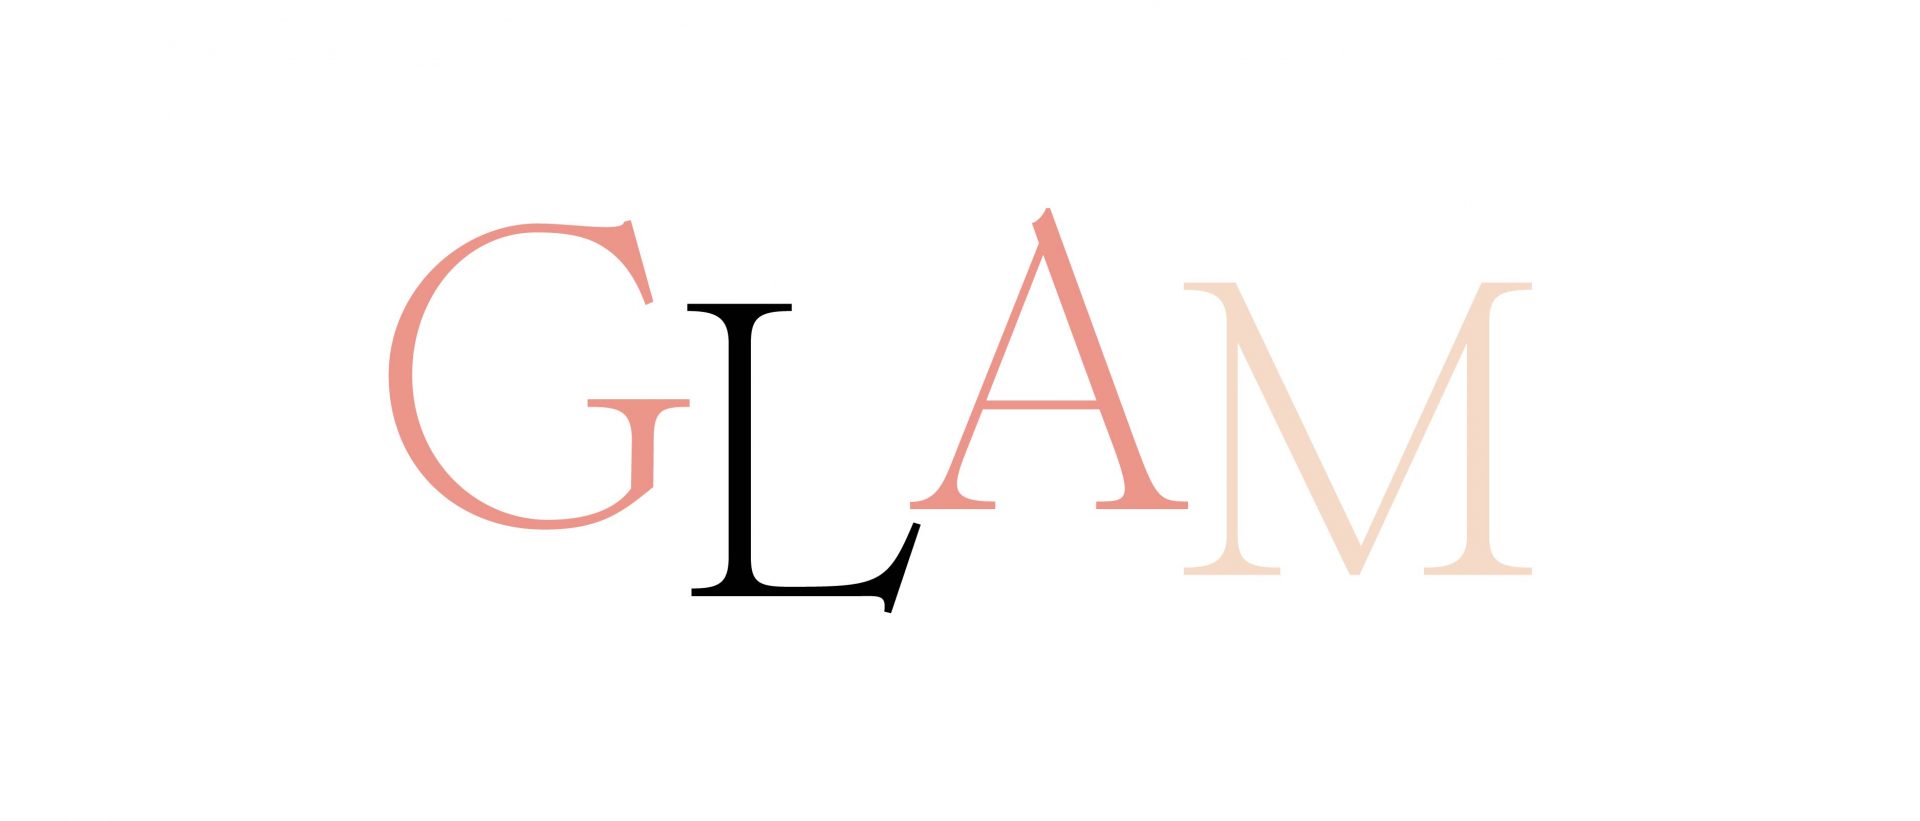 What is the glam style?